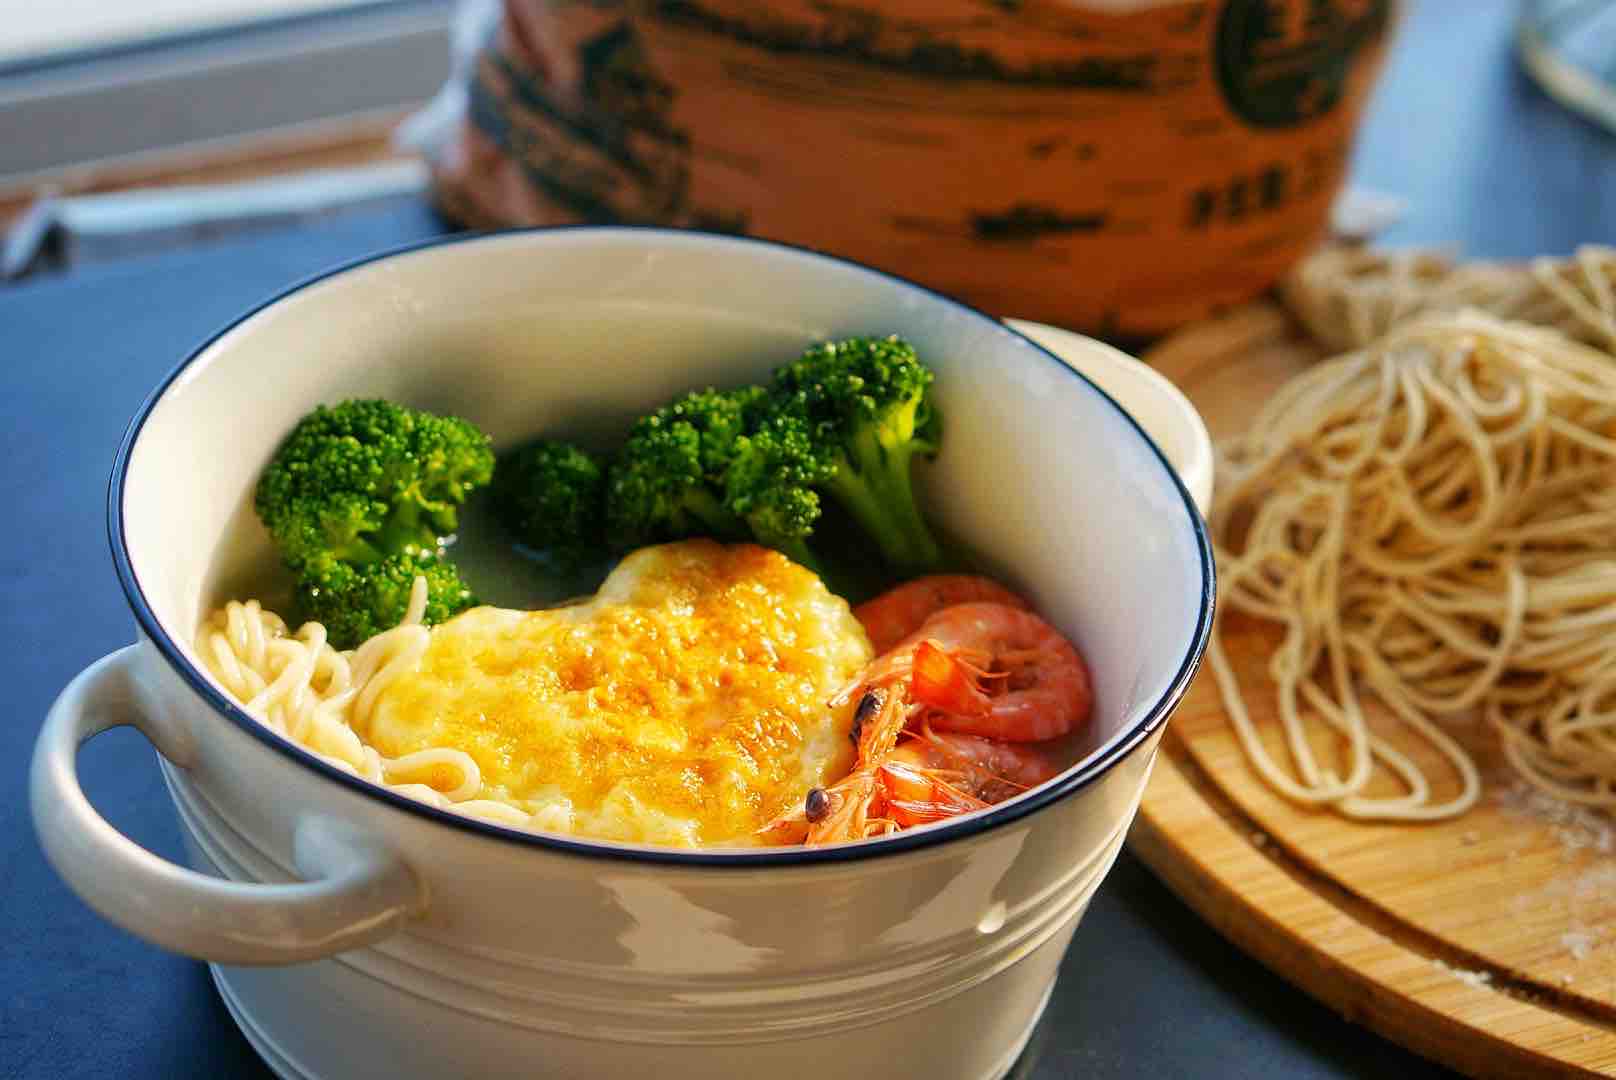 Naked Oat Noodles in Seafood Soup recipe